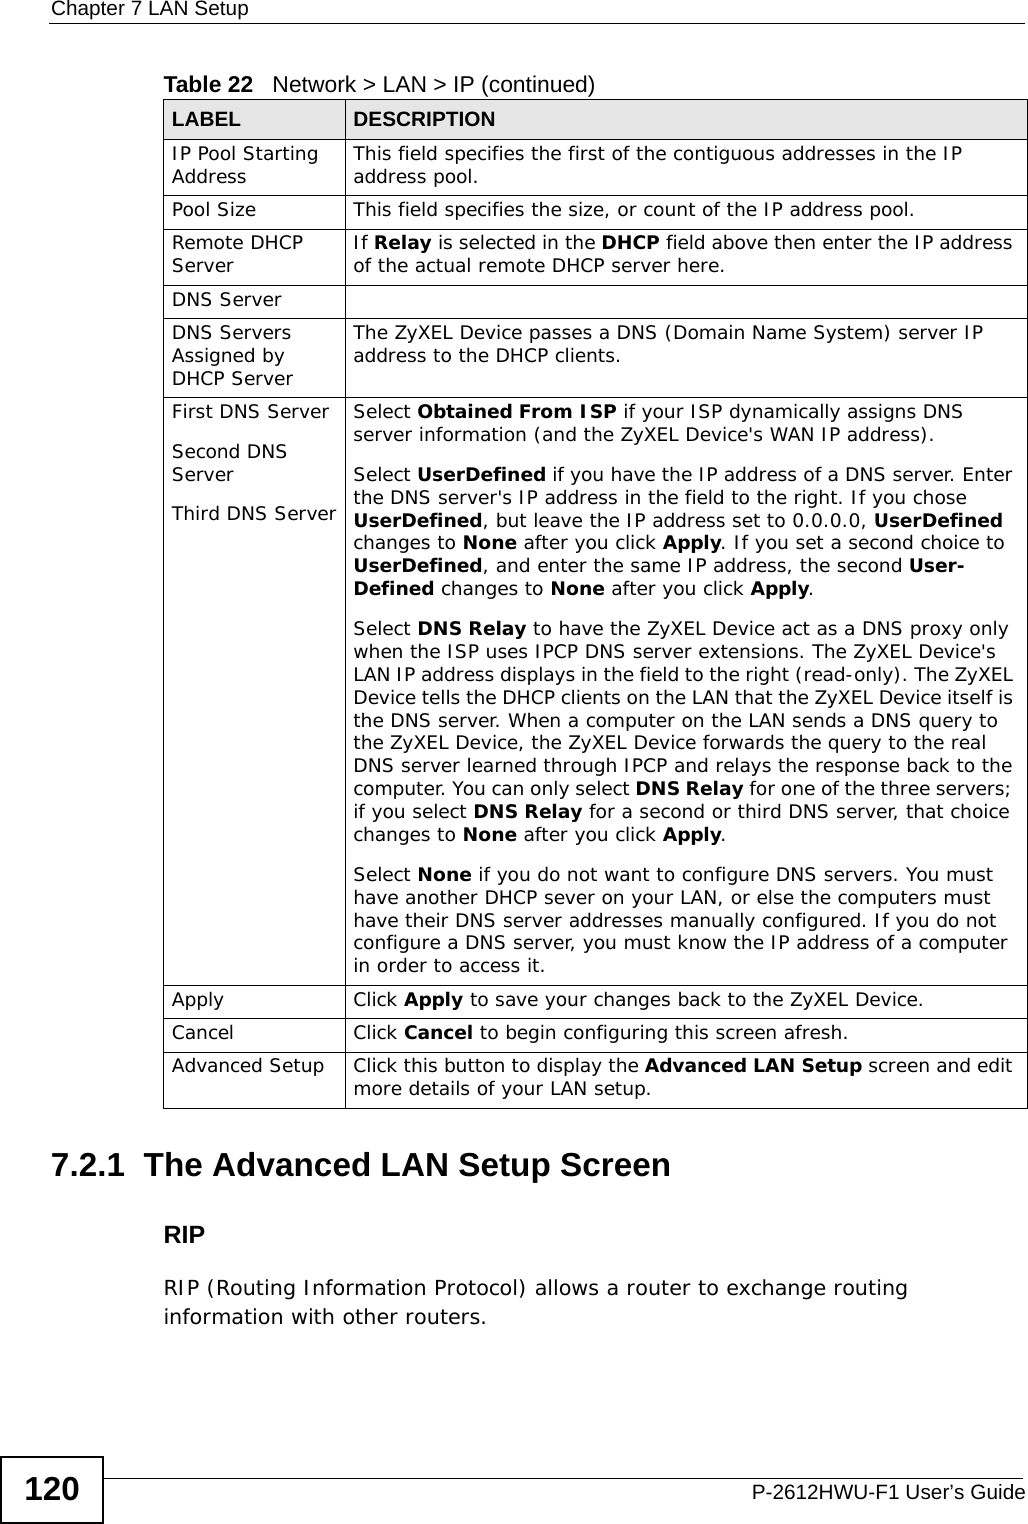 Chapter 7 LAN SetupP-2612HWU-F1 User’s Guide1207.2.1  The Advanced LAN Setup Screen RIPRIP (Routing Information Protocol) allows a router to exchange routing information with other routers.IP Pool Starting Address This field specifies the first of the contiguous addresses in the IP address pool.Pool Size This field specifies the size, or count of the IP address pool.Remote DHCP Server If Relay is selected in the DHCP field above then enter the IP address of the actual remote DHCP server here.DNS ServerDNS Servers Assigned by DHCP ServerThe ZyXEL Device passes a DNS (Domain Name System) server IP address to the DHCP clients. First DNS ServerSecond DNS ServerThird DNS ServerSelect Obtained From ISP if your ISP dynamically assigns DNS server information (and the ZyXEL Device&apos;s WAN IP address).Select UserDefined if you have the IP address of a DNS server. Enter the DNS server&apos;s IP address in the field to the right. If you chose UserDefined, but leave the IP address set to 0.0.0.0, UserDefined changes to None after you click Apply. If you set a second choice to UserDefined, and enter the same IP address, the second User-Defined changes to None after you click Apply. Select DNS Relay to have the ZyXEL Device act as a DNS proxy only when the ISP uses IPCP DNS server extensions. The ZyXEL Device&apos;s LAN IP address displays in the field to the right (read-only). The ZyXEL Device tells the DHCP clients on the LAN that the ZyXEL Device itself is the DNS server. When a computer on the LAN sends a DNS query to the ZyXEL Device, the ZyXEL Device forwards the query to the real DNS server learned through IPCP and relays the response back to the computer. You can only select DNS Relay for one of the three servers; if you select DNS Relay for a second or third DNS server, that choice changes to None after you click Apply. Select None if you do not want to configure DNS servers. You must have another DHCP sever on your LAN, or else the computers must have their DNS server addresses manually configured. If you do not configure a DNS server, you must know the IP address of a computer in order to access it.Apply Click Apply to save your changes back to the ZyXEL Device.Cancel Click Cancel to begin configuring this screen afresh.Advanced Setup Click this button to display the Advanced LAN Setup screen and edit more details of your LAN setup.Table 22   Network &gt; LAN &gt; IP (continued)LABEL DESCRIPTION